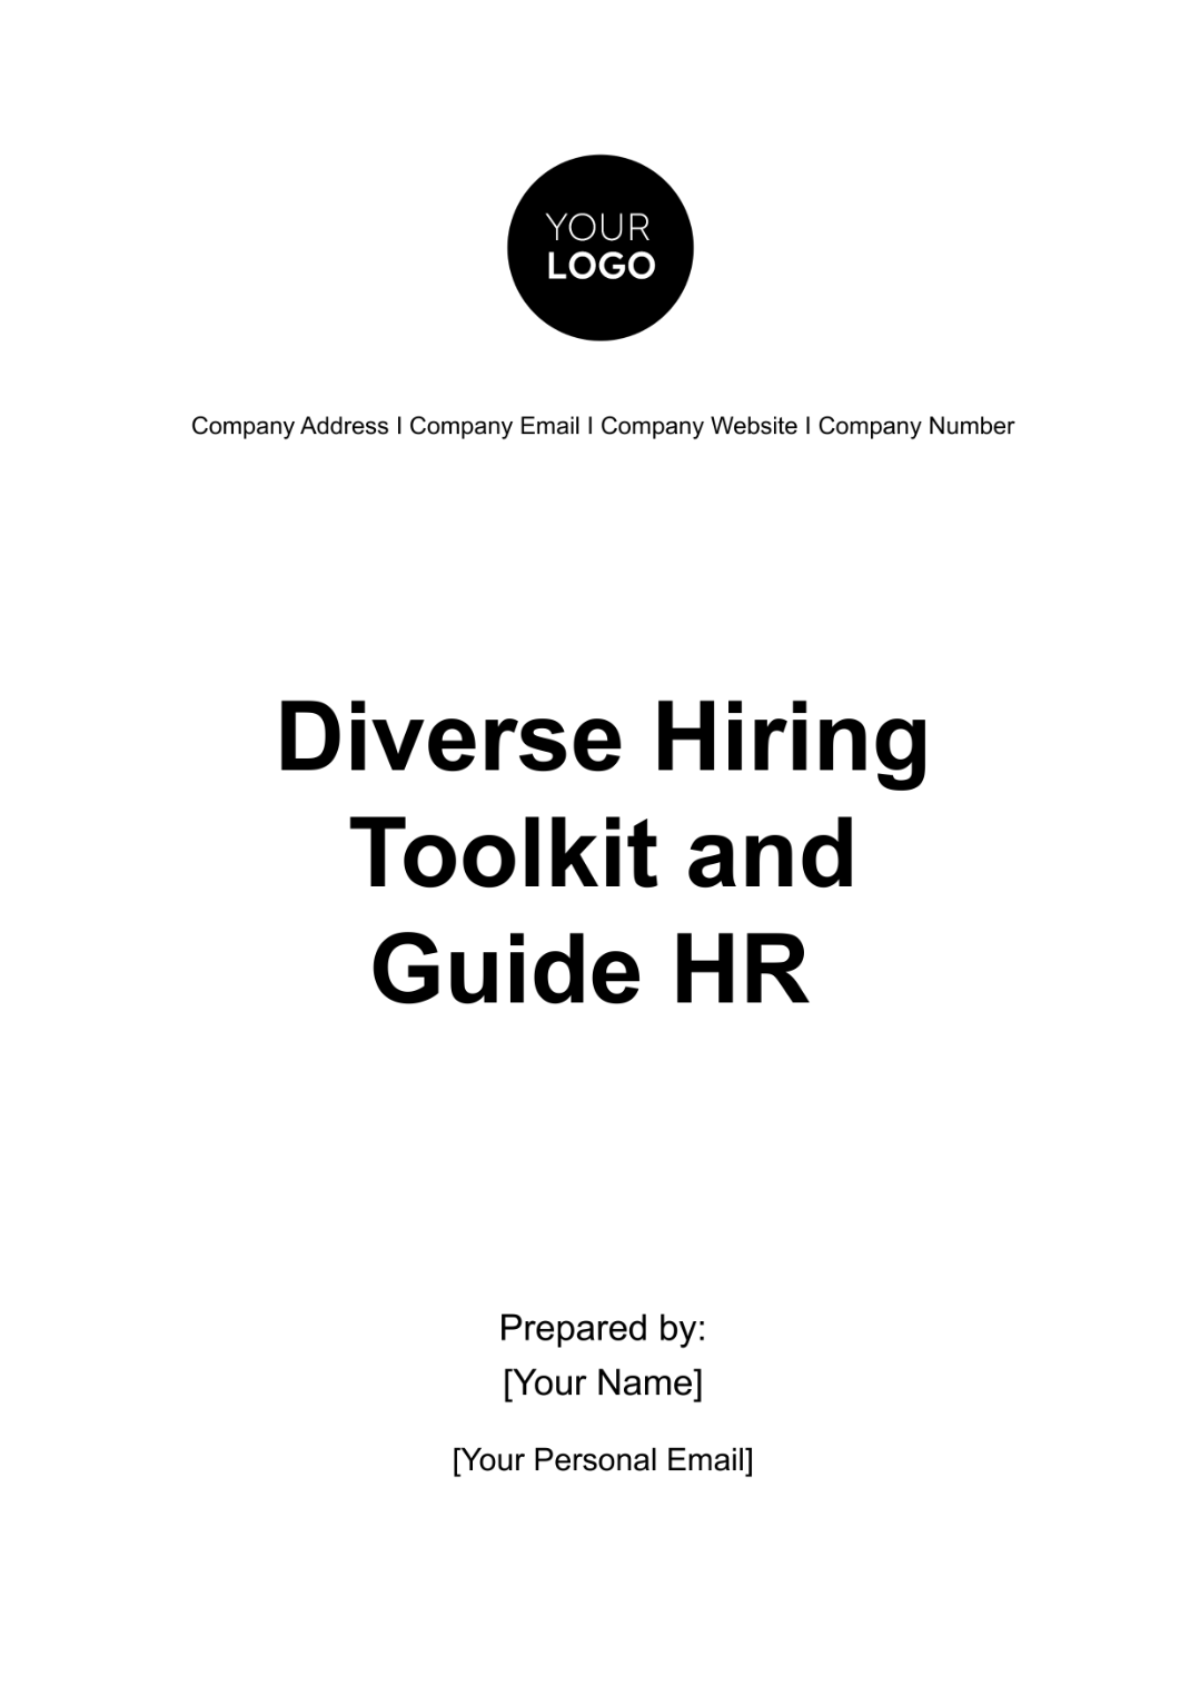 Diverse Hiring Toolkit and Guide HR Template